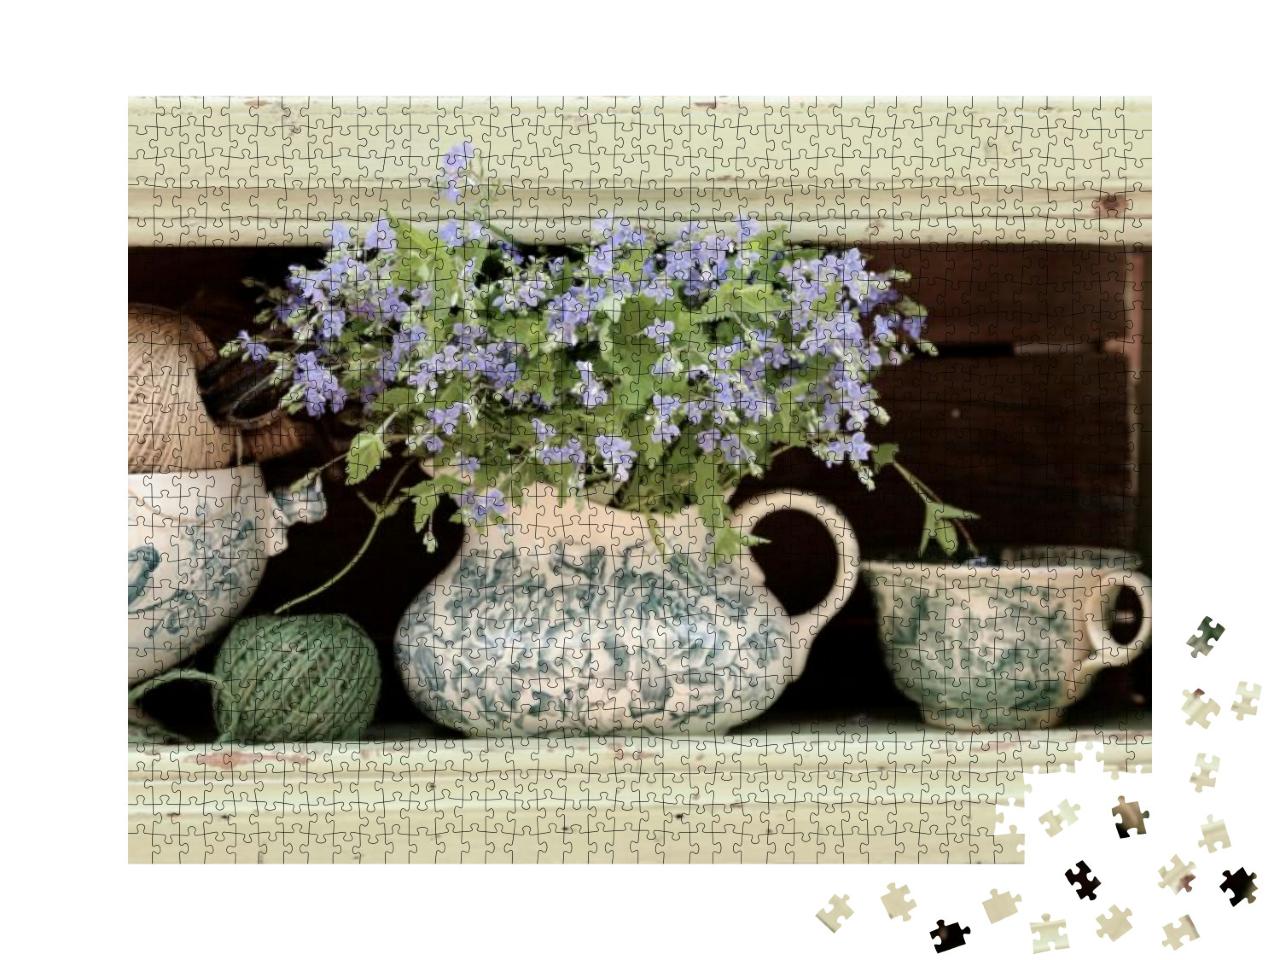 Blue Wild Flowers in Antique, Vintage Pitcher, Big Cup on... Jigsaw Puzzle with 1000 pieces